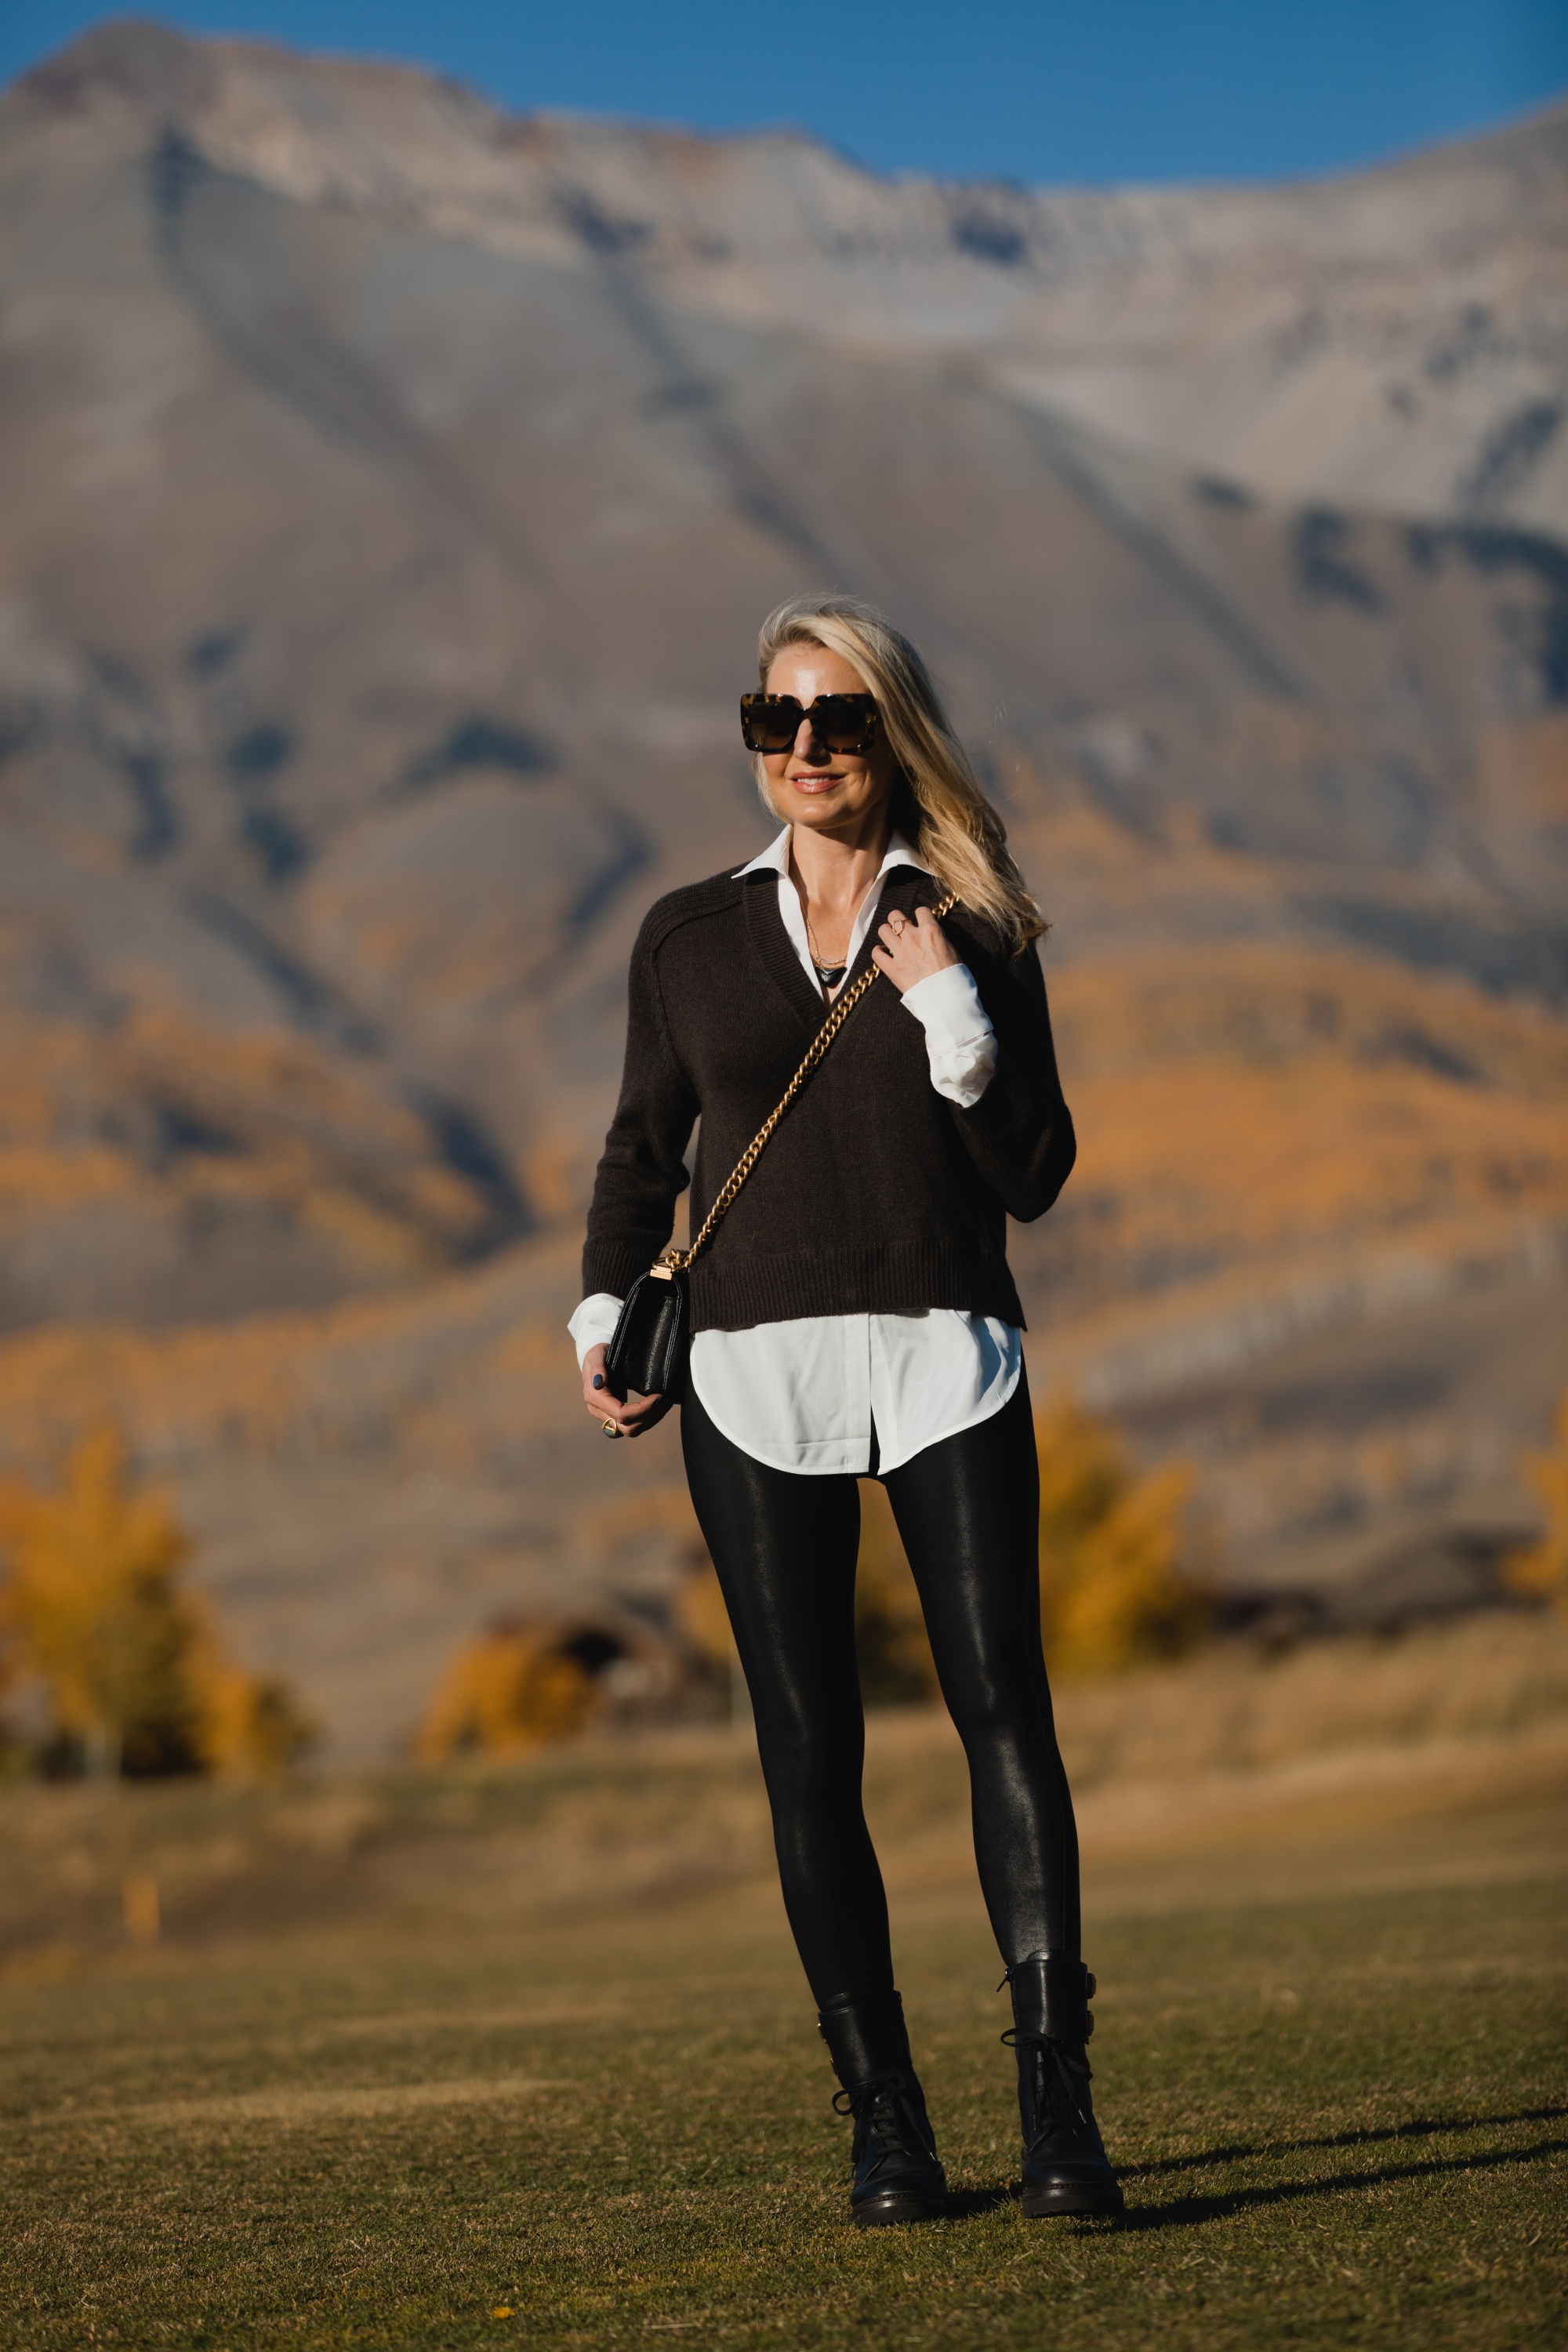 Layered Sweater, Erin Busbee of Busbee Style wearing a brown layered sweater by Brochu Walker, Spanx faux leather leggings, See by Chloe combat boots, and black Chanel boy bag in Telluride, Colorado